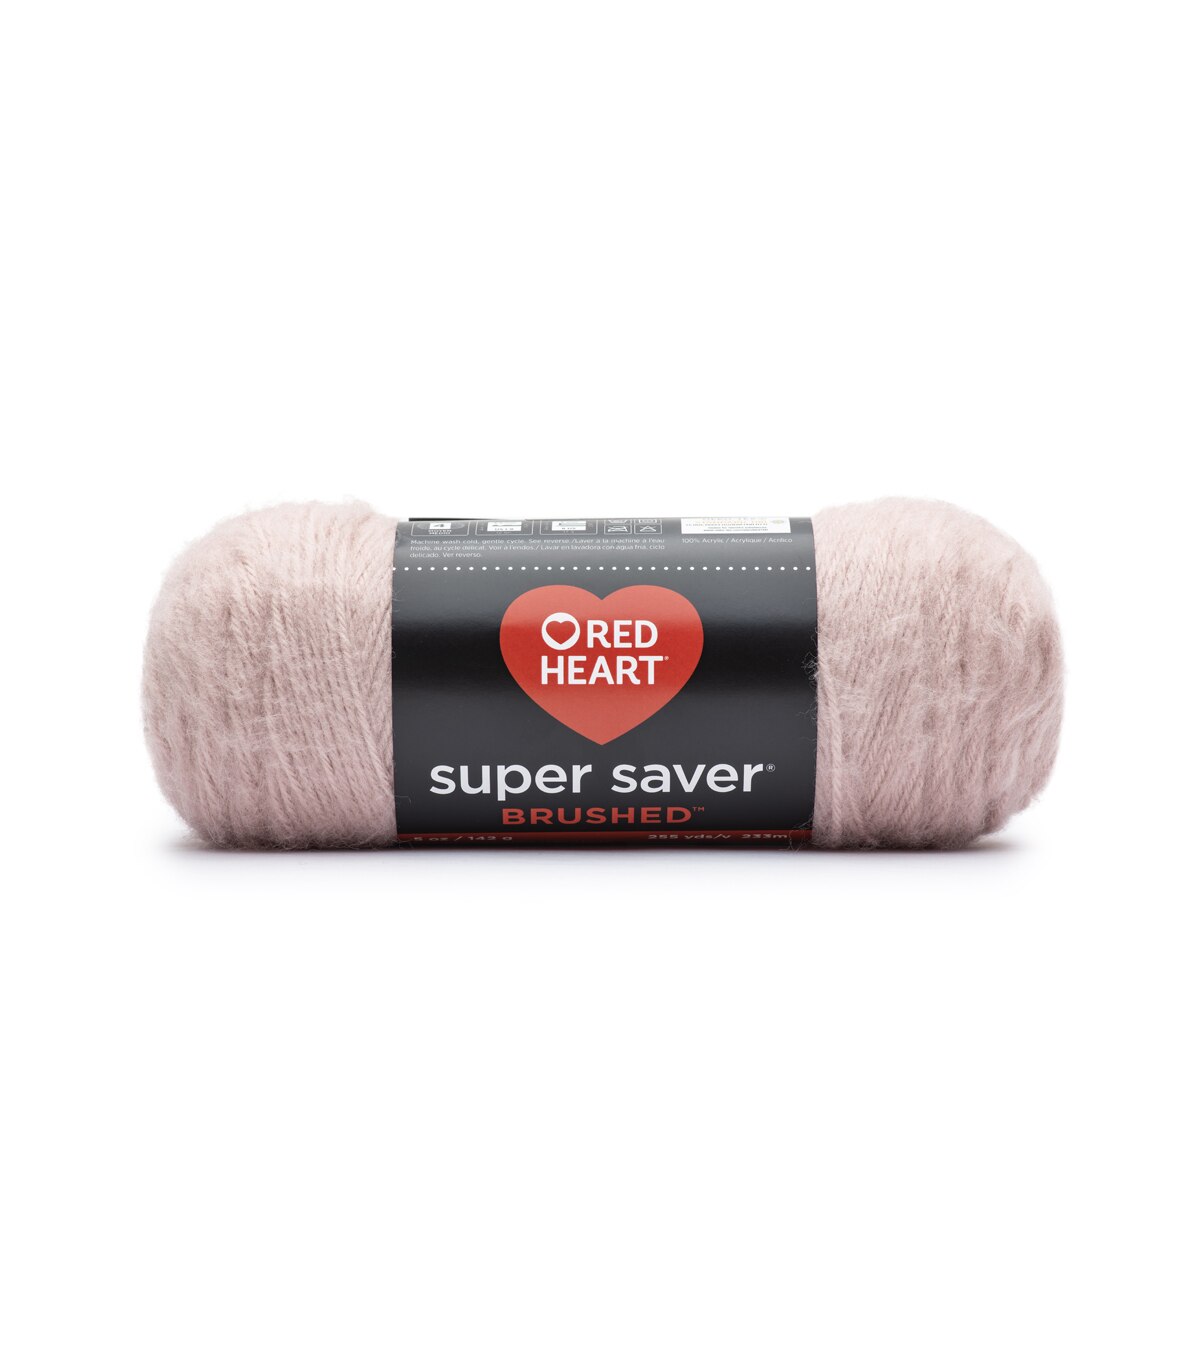 Red Heart Dusty Pink Super Saver Brushed Yarn